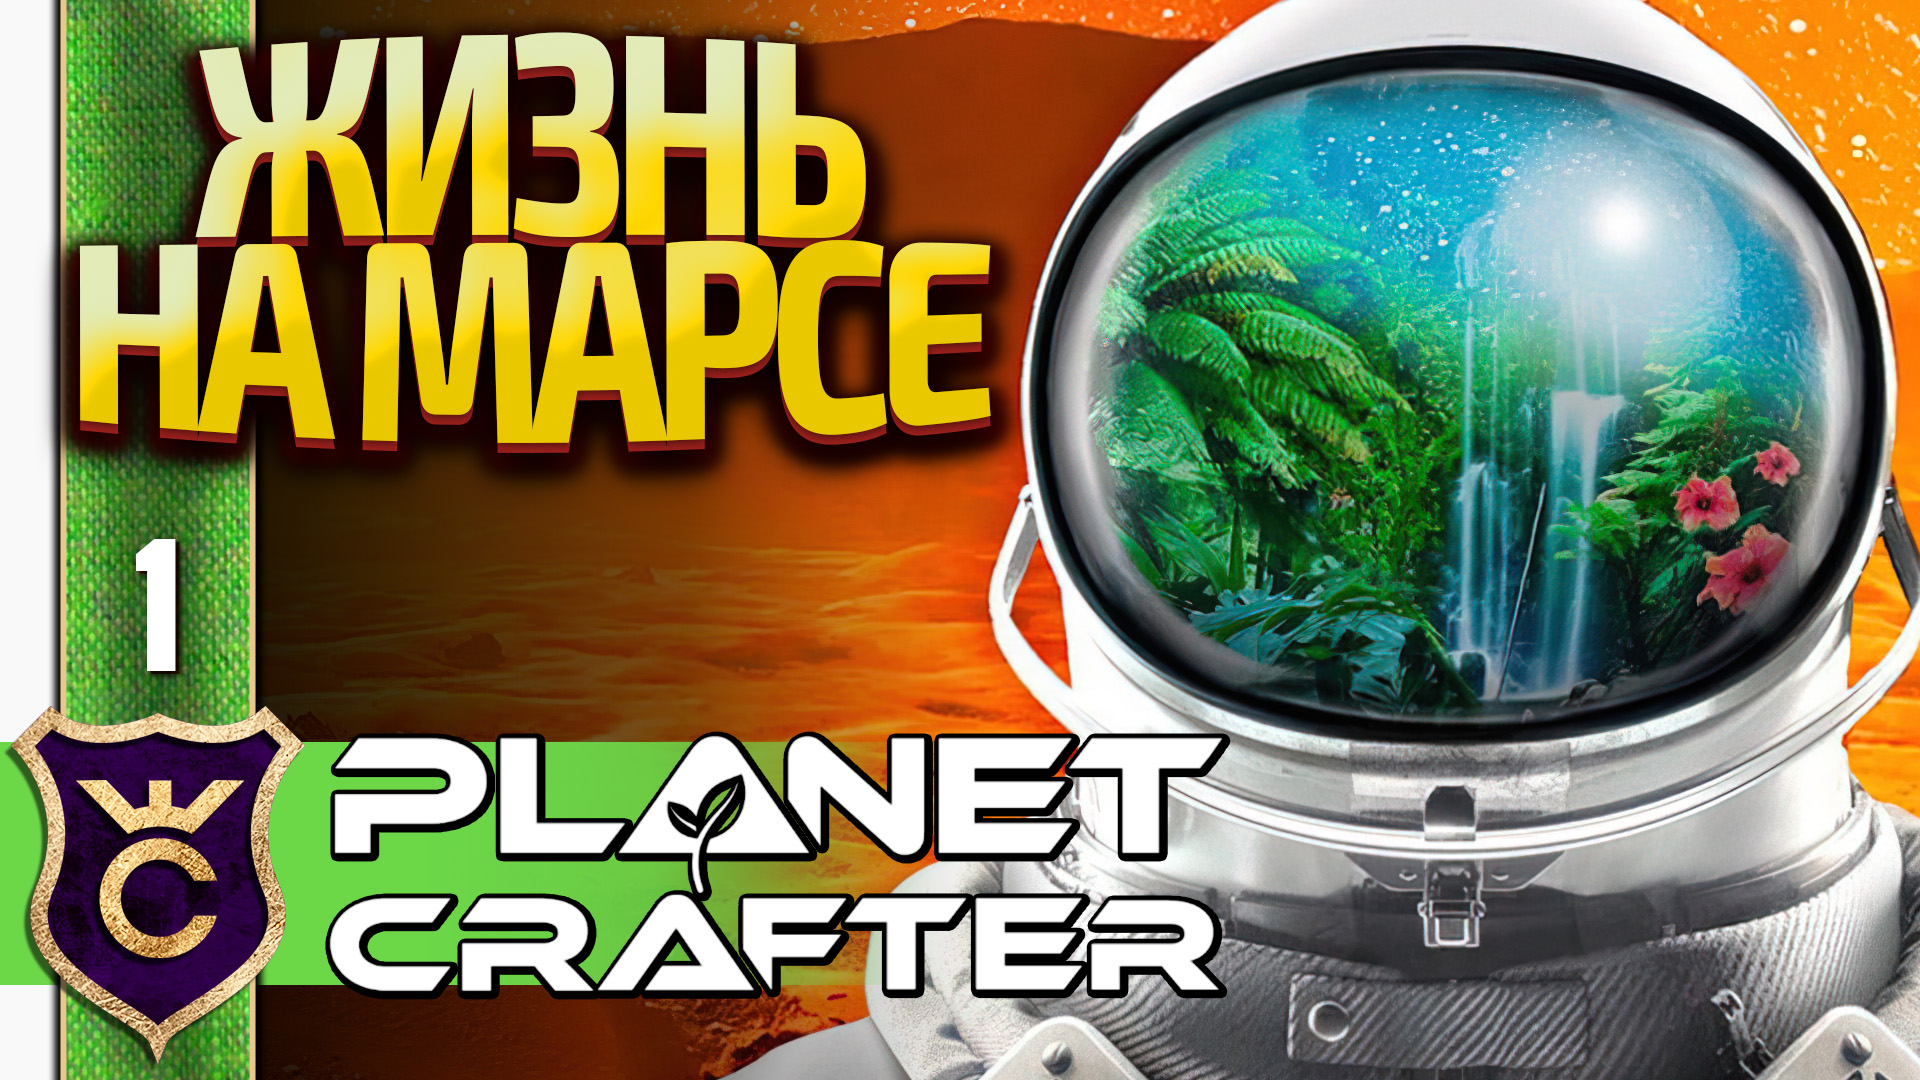 The planet crafter читы. The Planet Crafter. Редкая личинка Planet Crafter. The Planet Crafter мутаген 2.